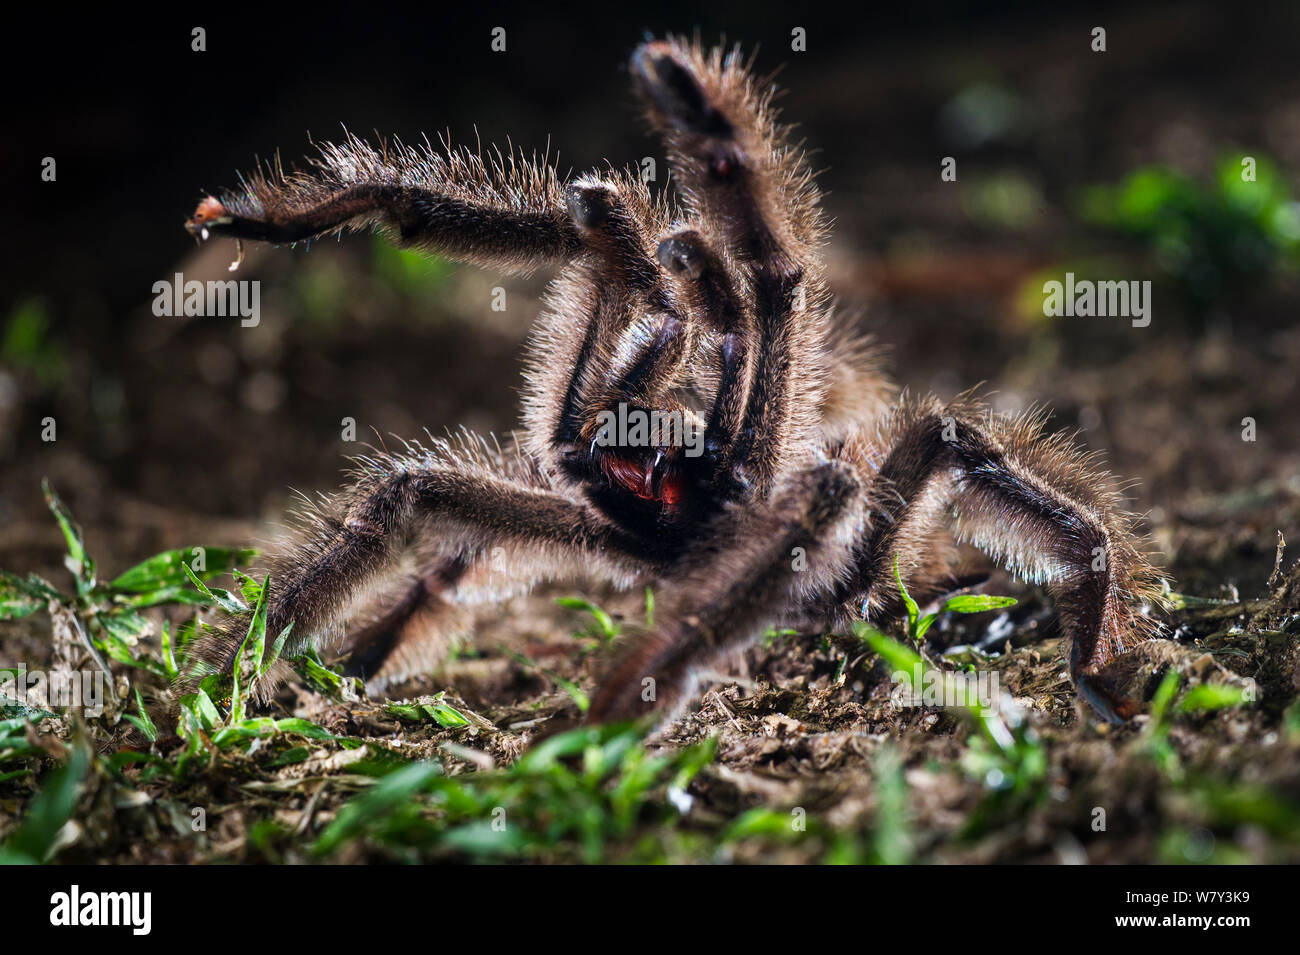 Colombian Pink-toed Tarantula (Avicularia metallica) in defensive posture, Paujil Nature Reserve, Magdalena Valley, Colombia, South America. Stock Photo